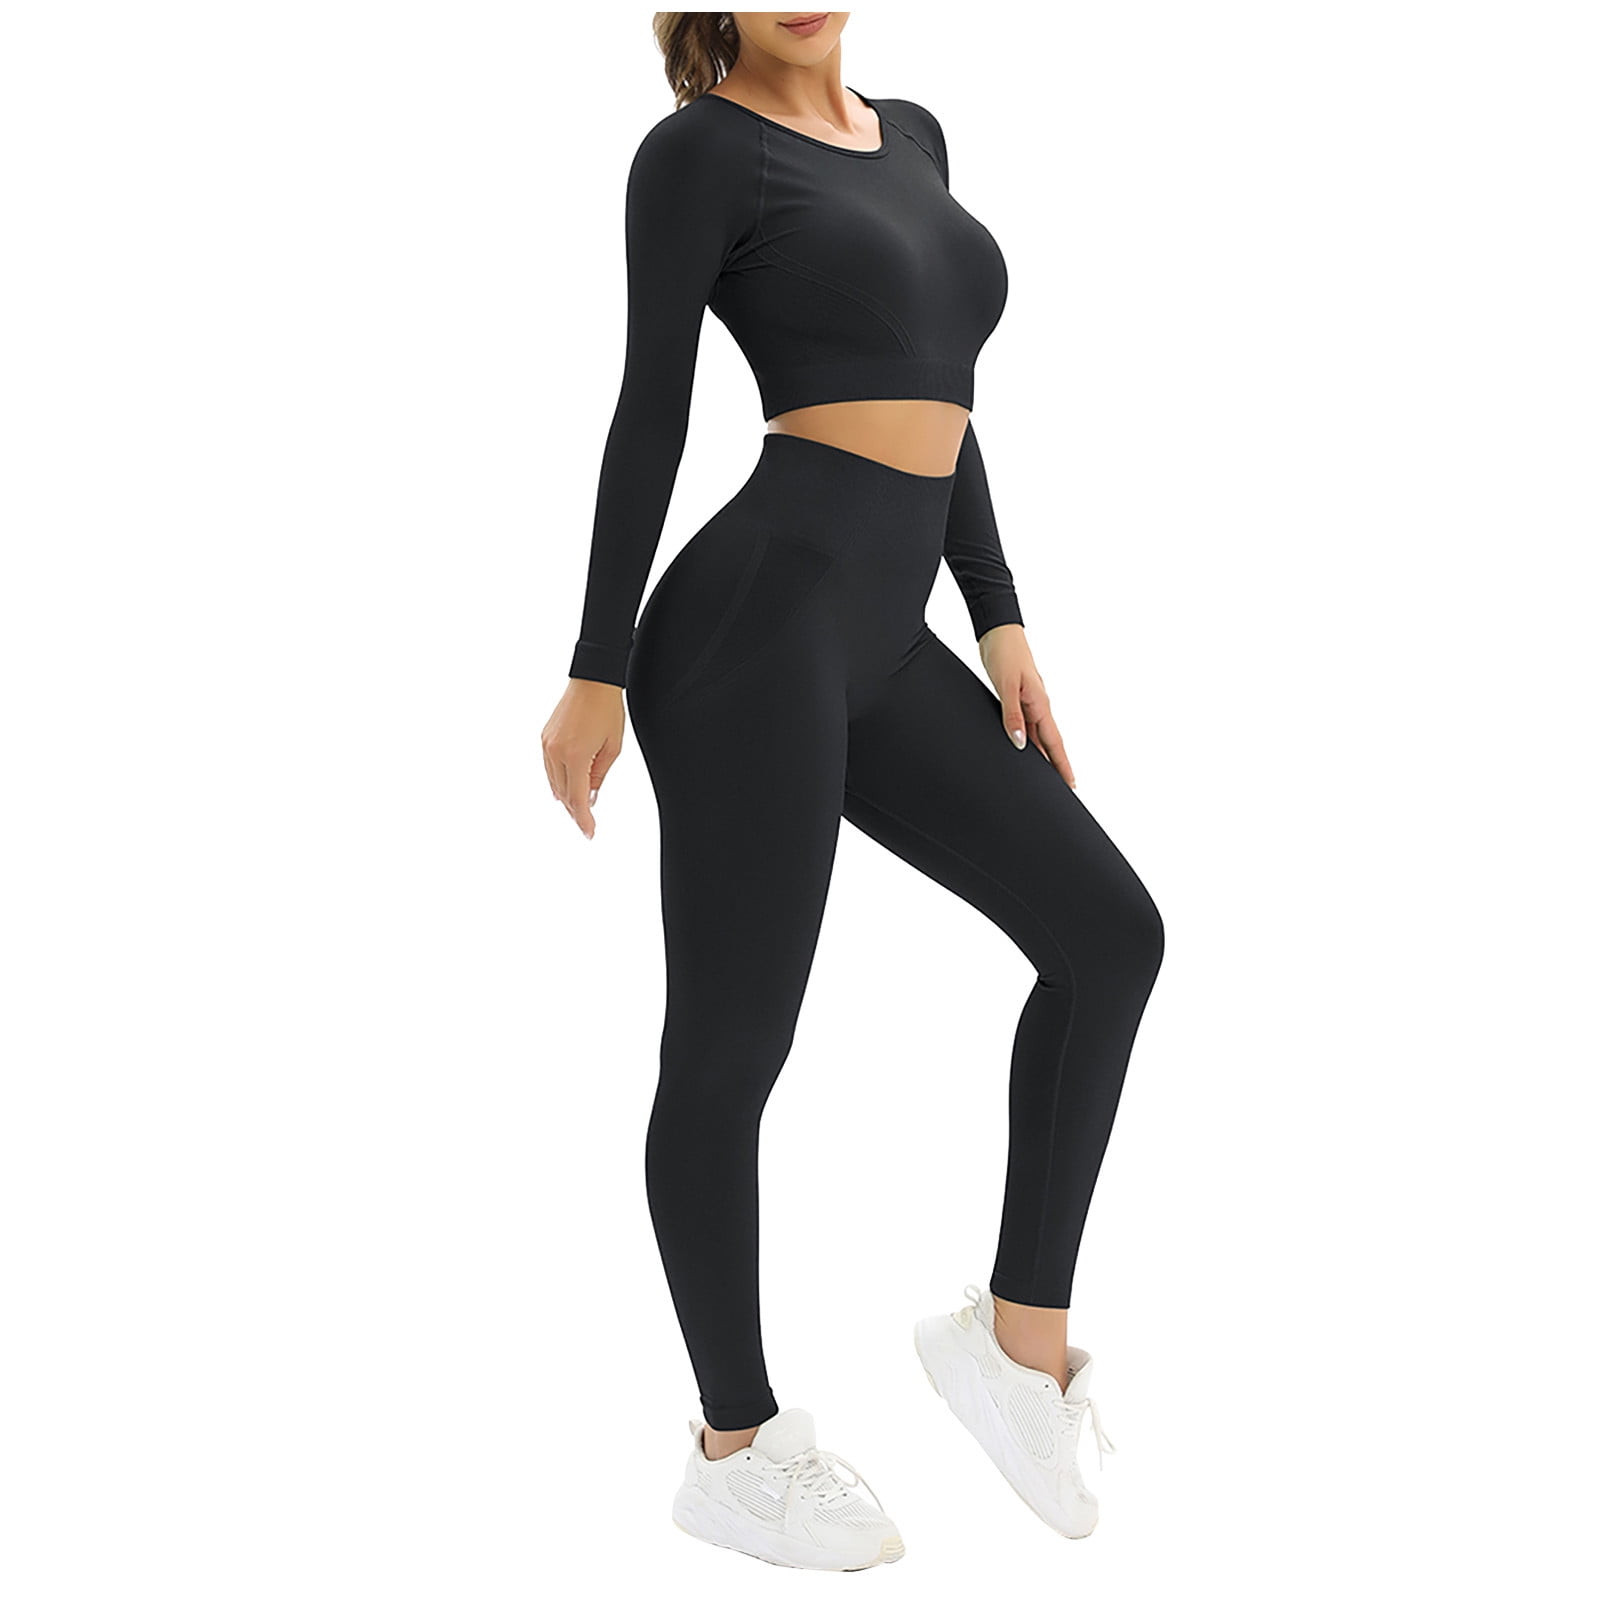 EUYZOU Womens High Waisted Workout Sets 2 Piece - Seamless Sports Legging  long Sleeve Crop Top Yoga Gym Outfits, Black (Legging&long Sleeve Top), M  price in UAE,  UAE